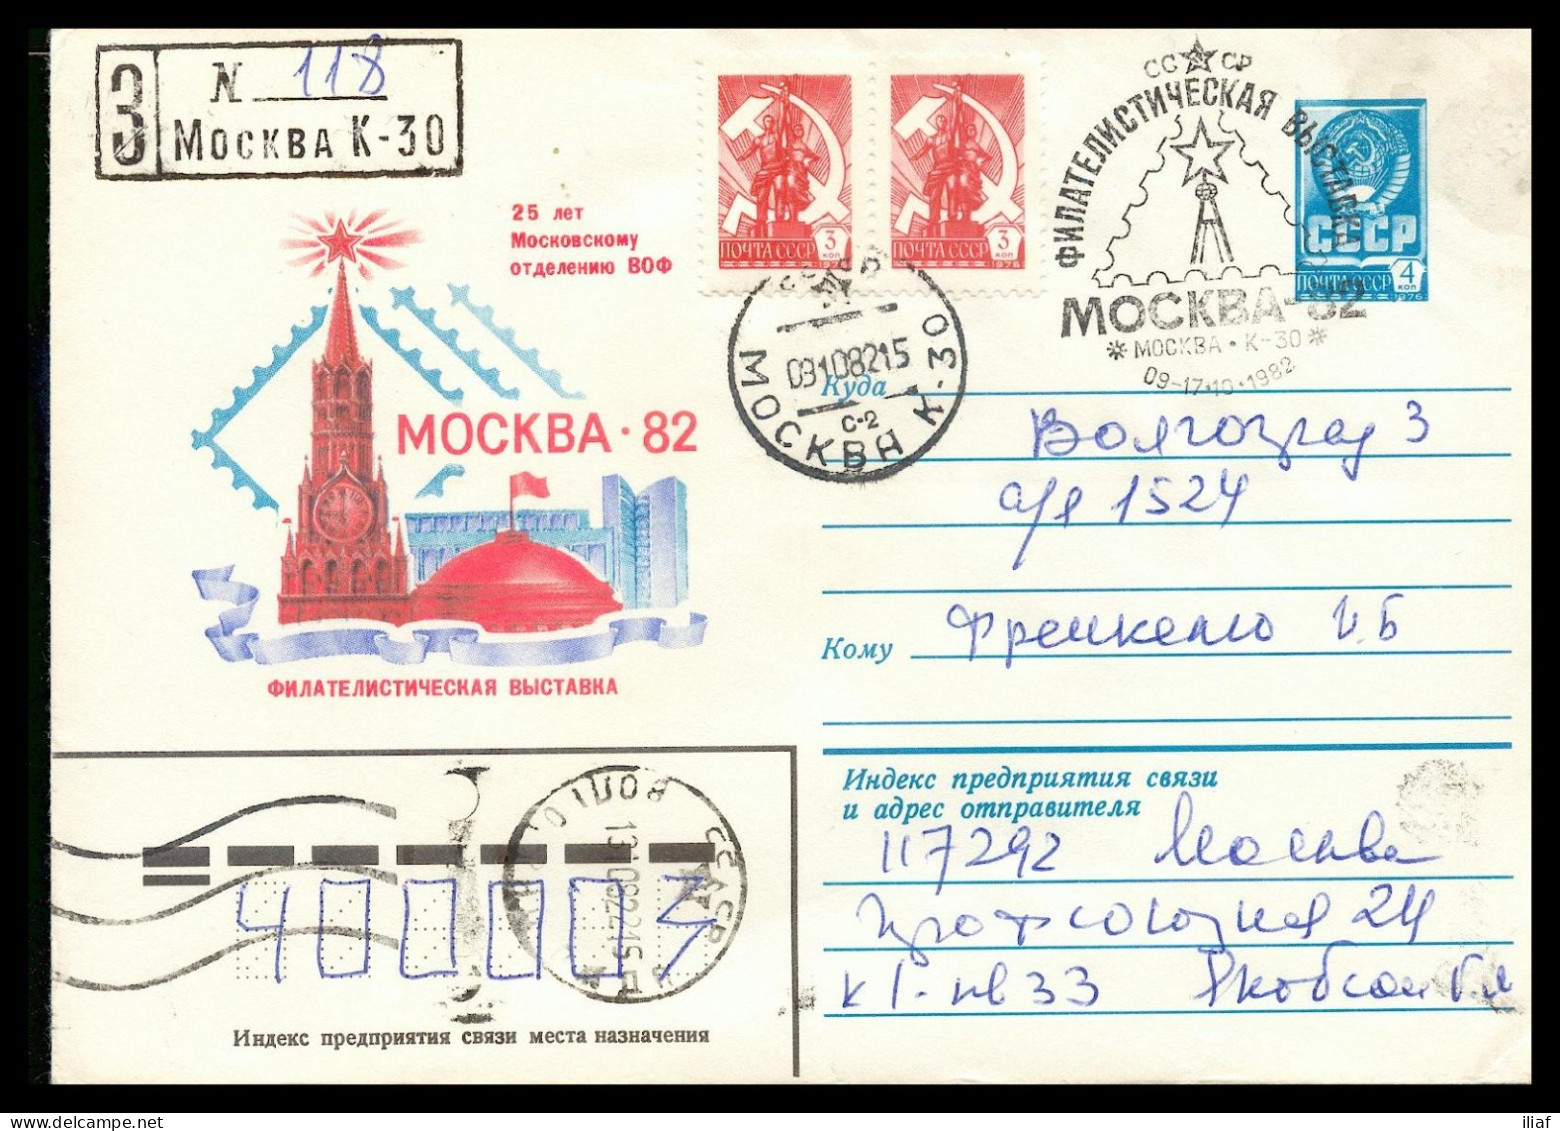 RUSSIA & USSR Philatelic Exhibition “Moscow-82”   Illustrated Envelope With Special Cancelation - Philatelic Exhibitions